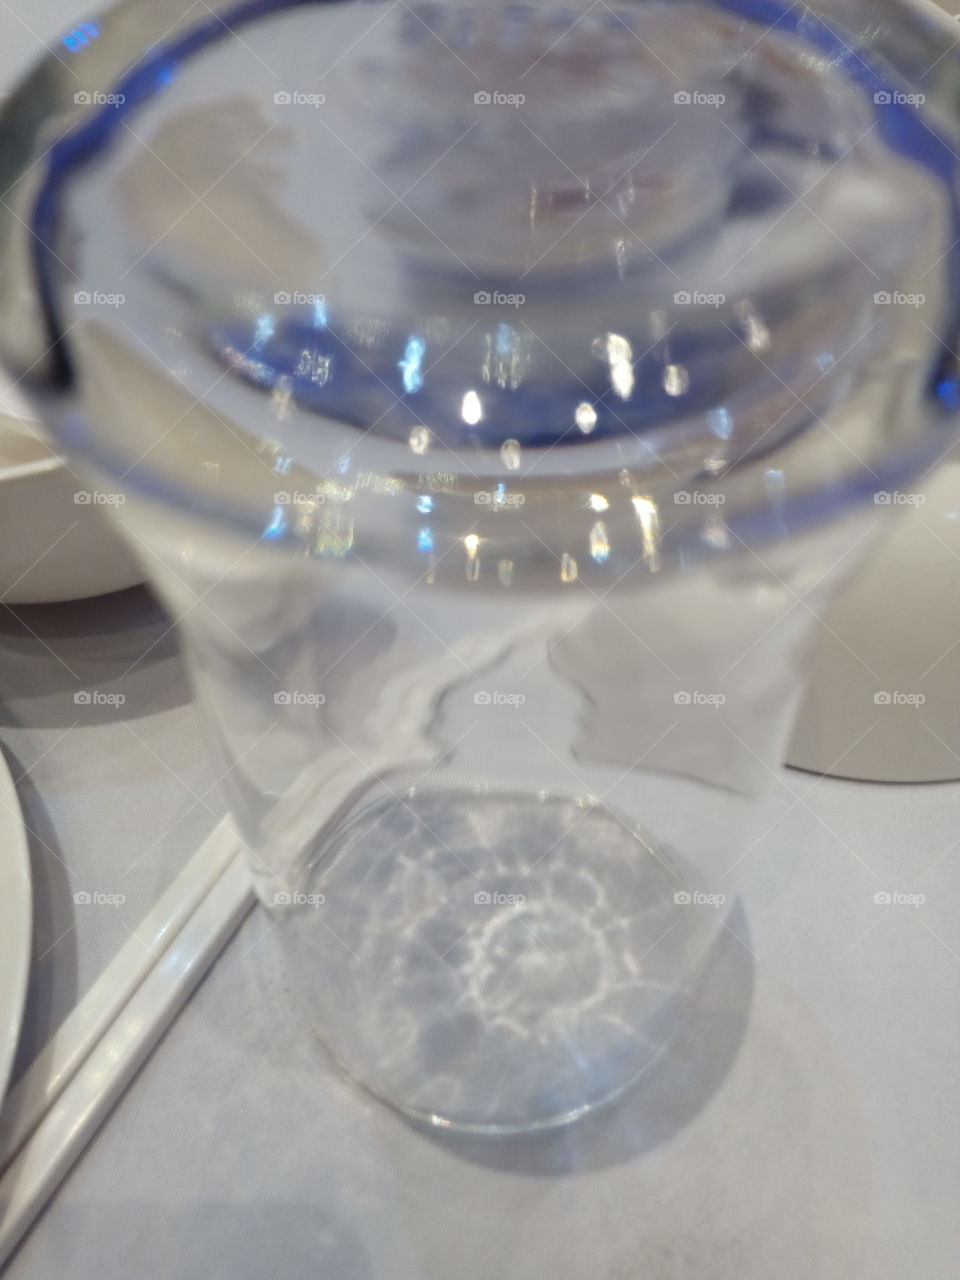 The glass on the table.